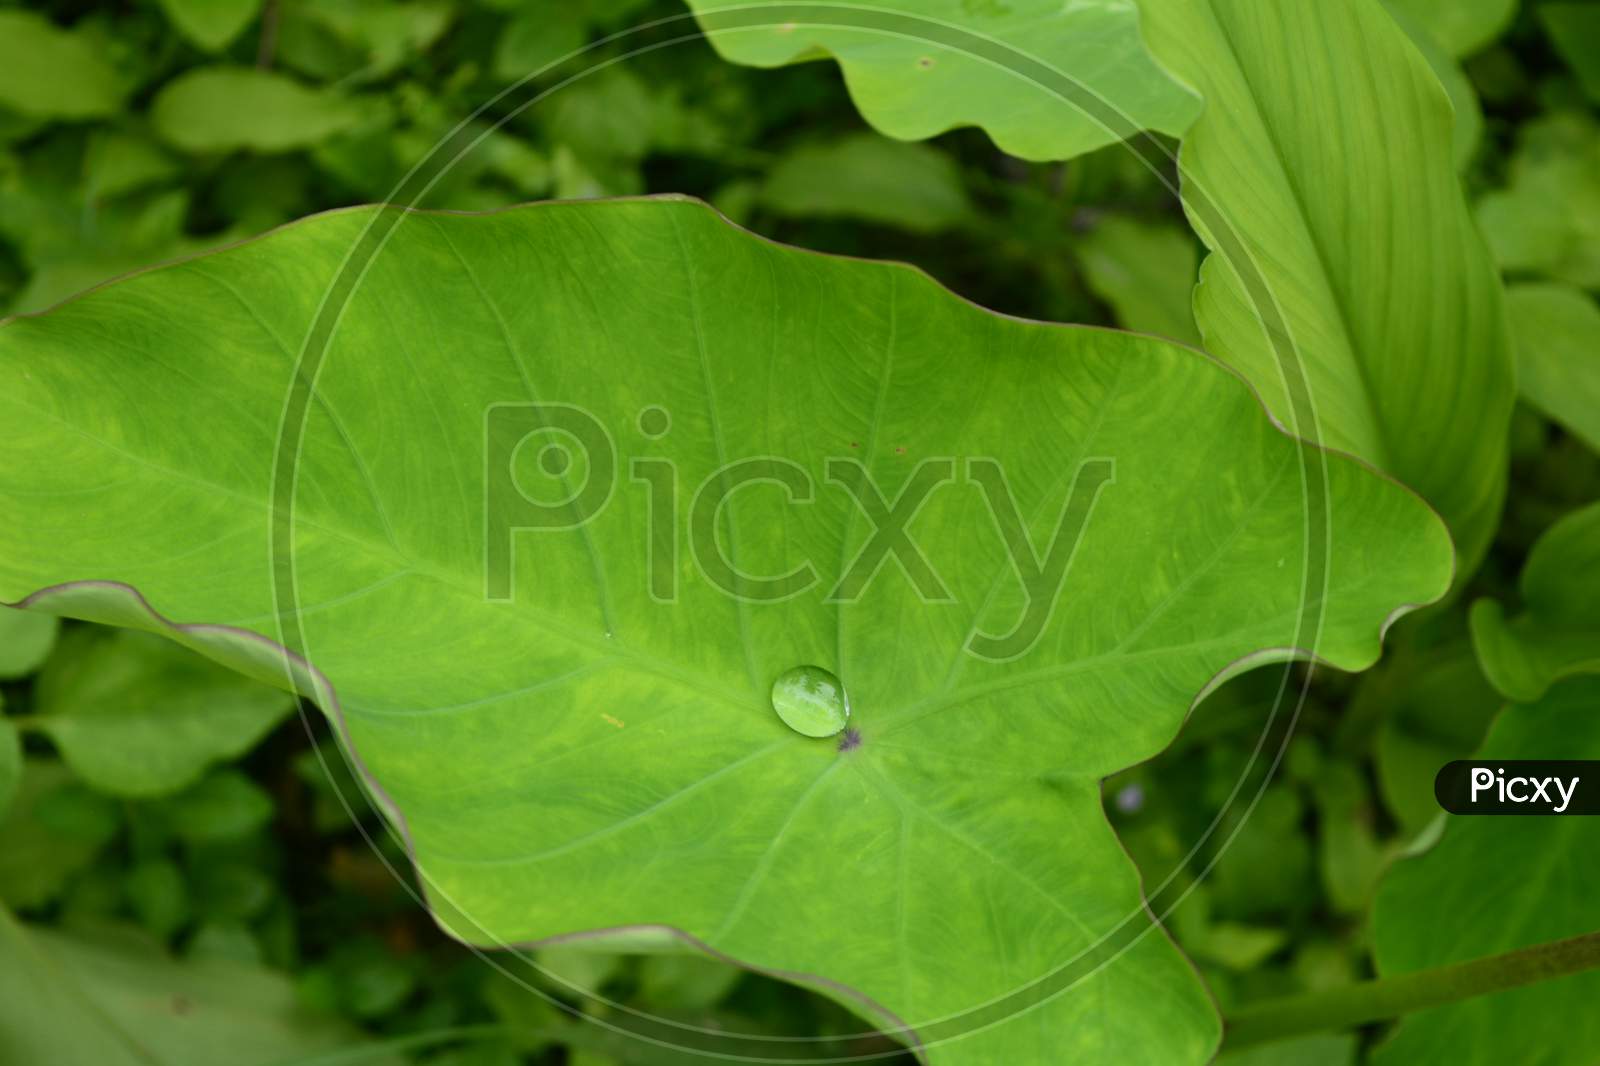 Single water droplet on a leaf